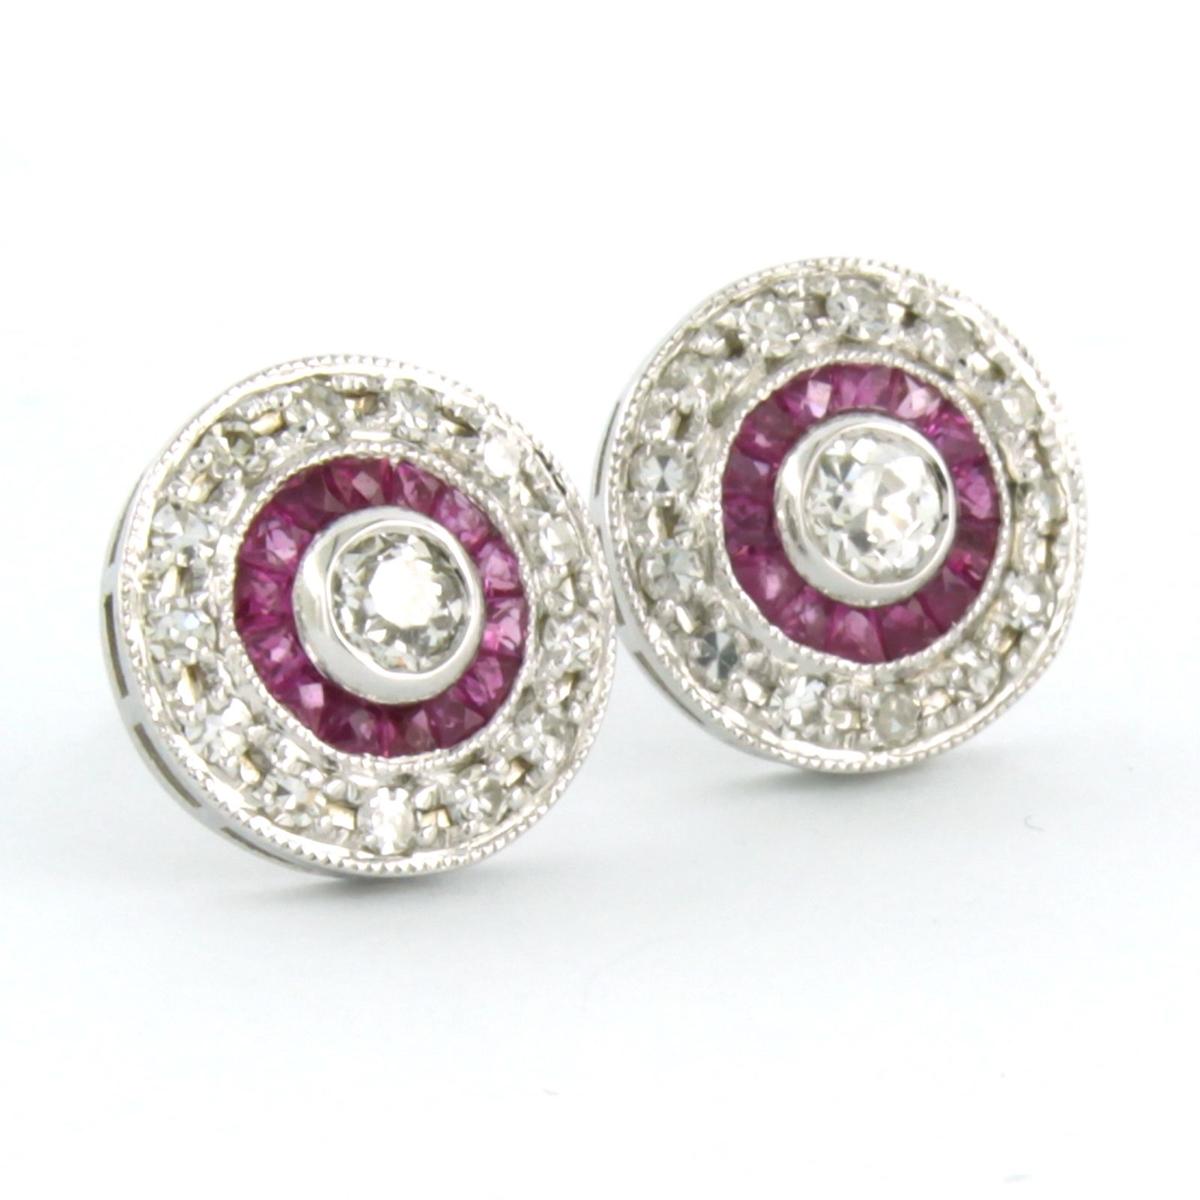 Old Mine Cut Earrings Ruby and Diamond 14k white gold in ART DECO STYLE 